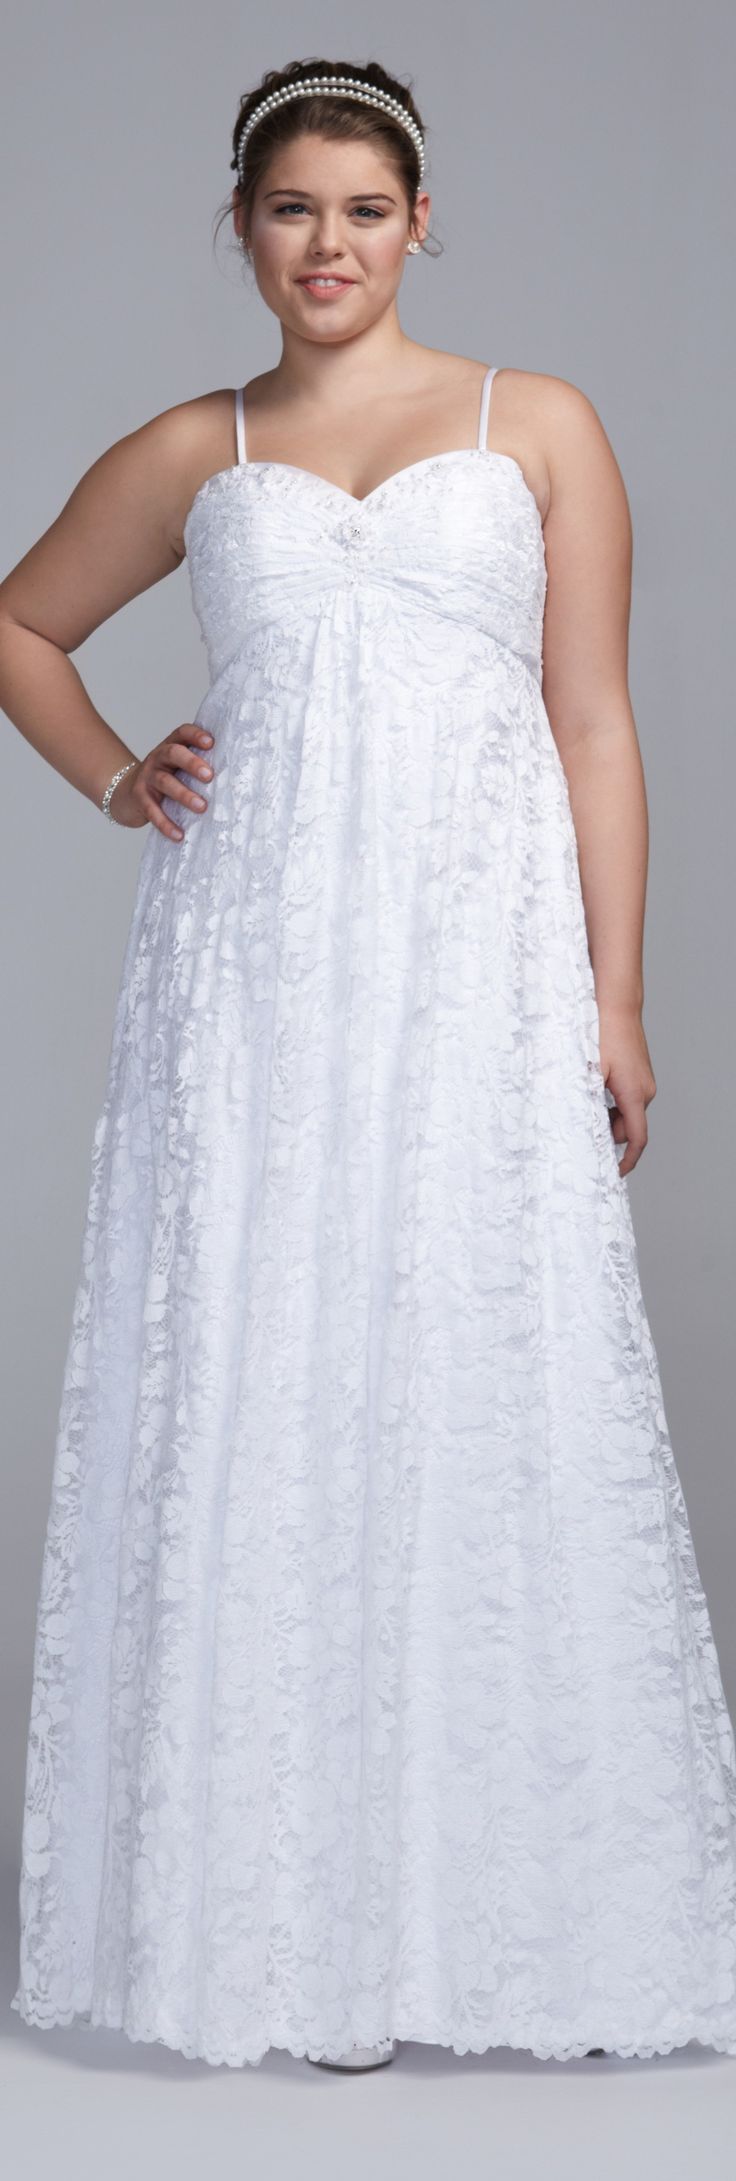 plus-size-bridal-gowns-some-popular-options